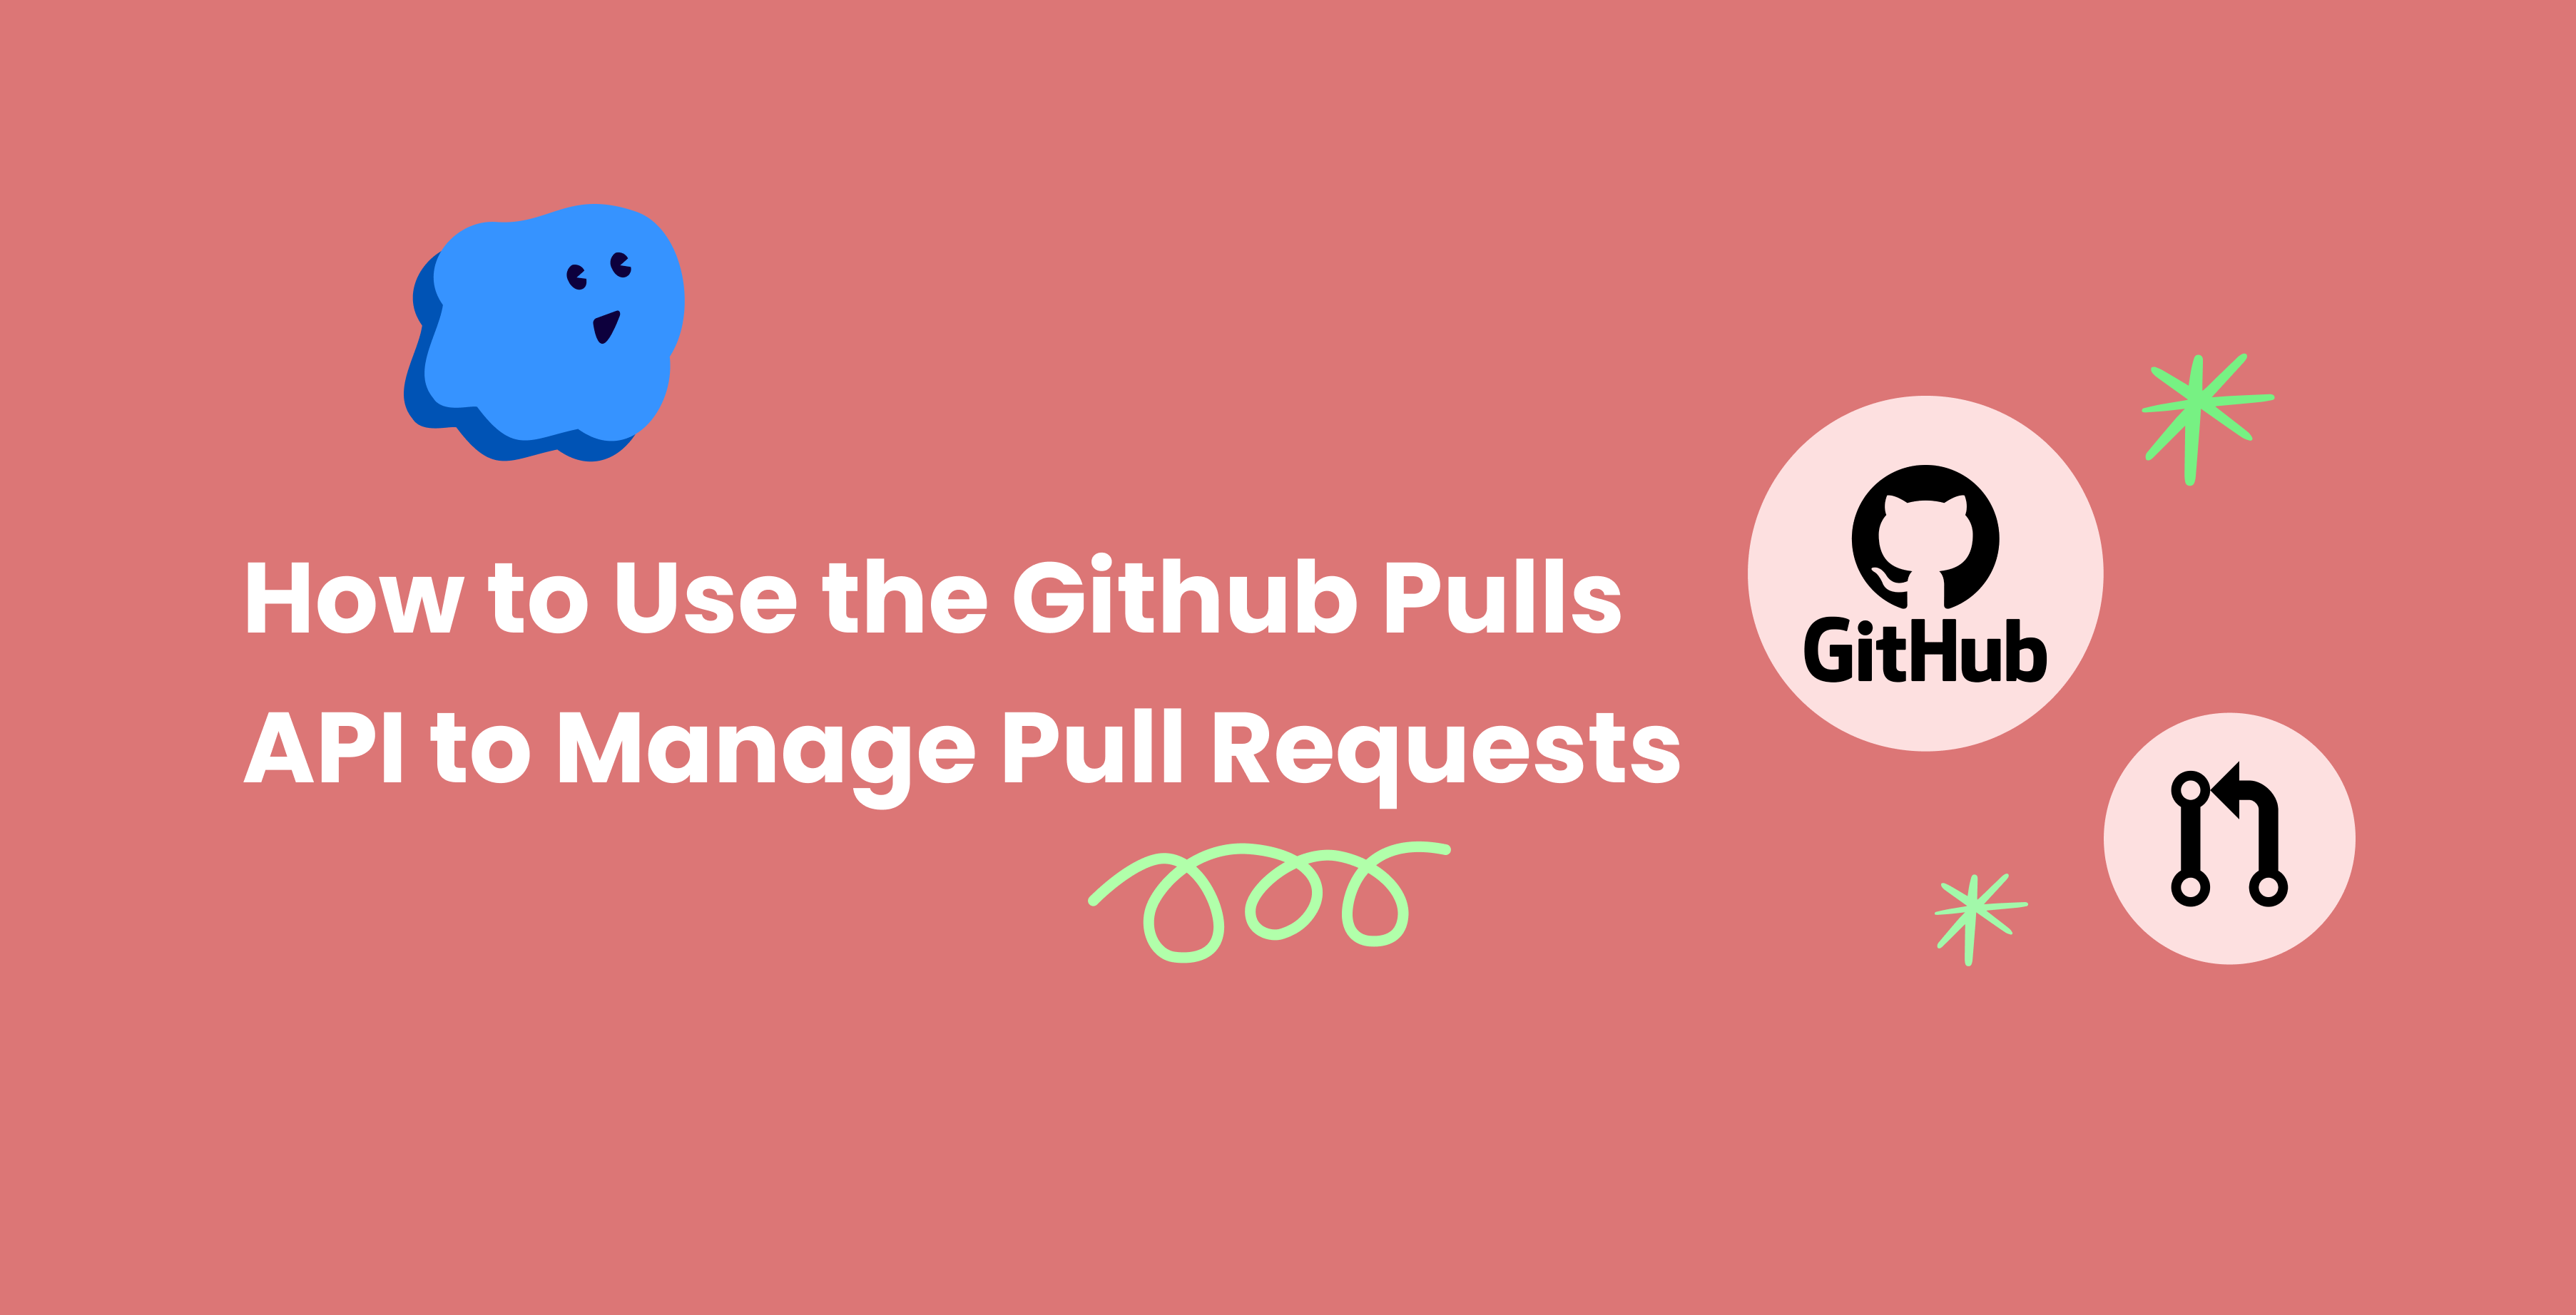 How to Use the GitHub Pulls API to Manage Pull Requests